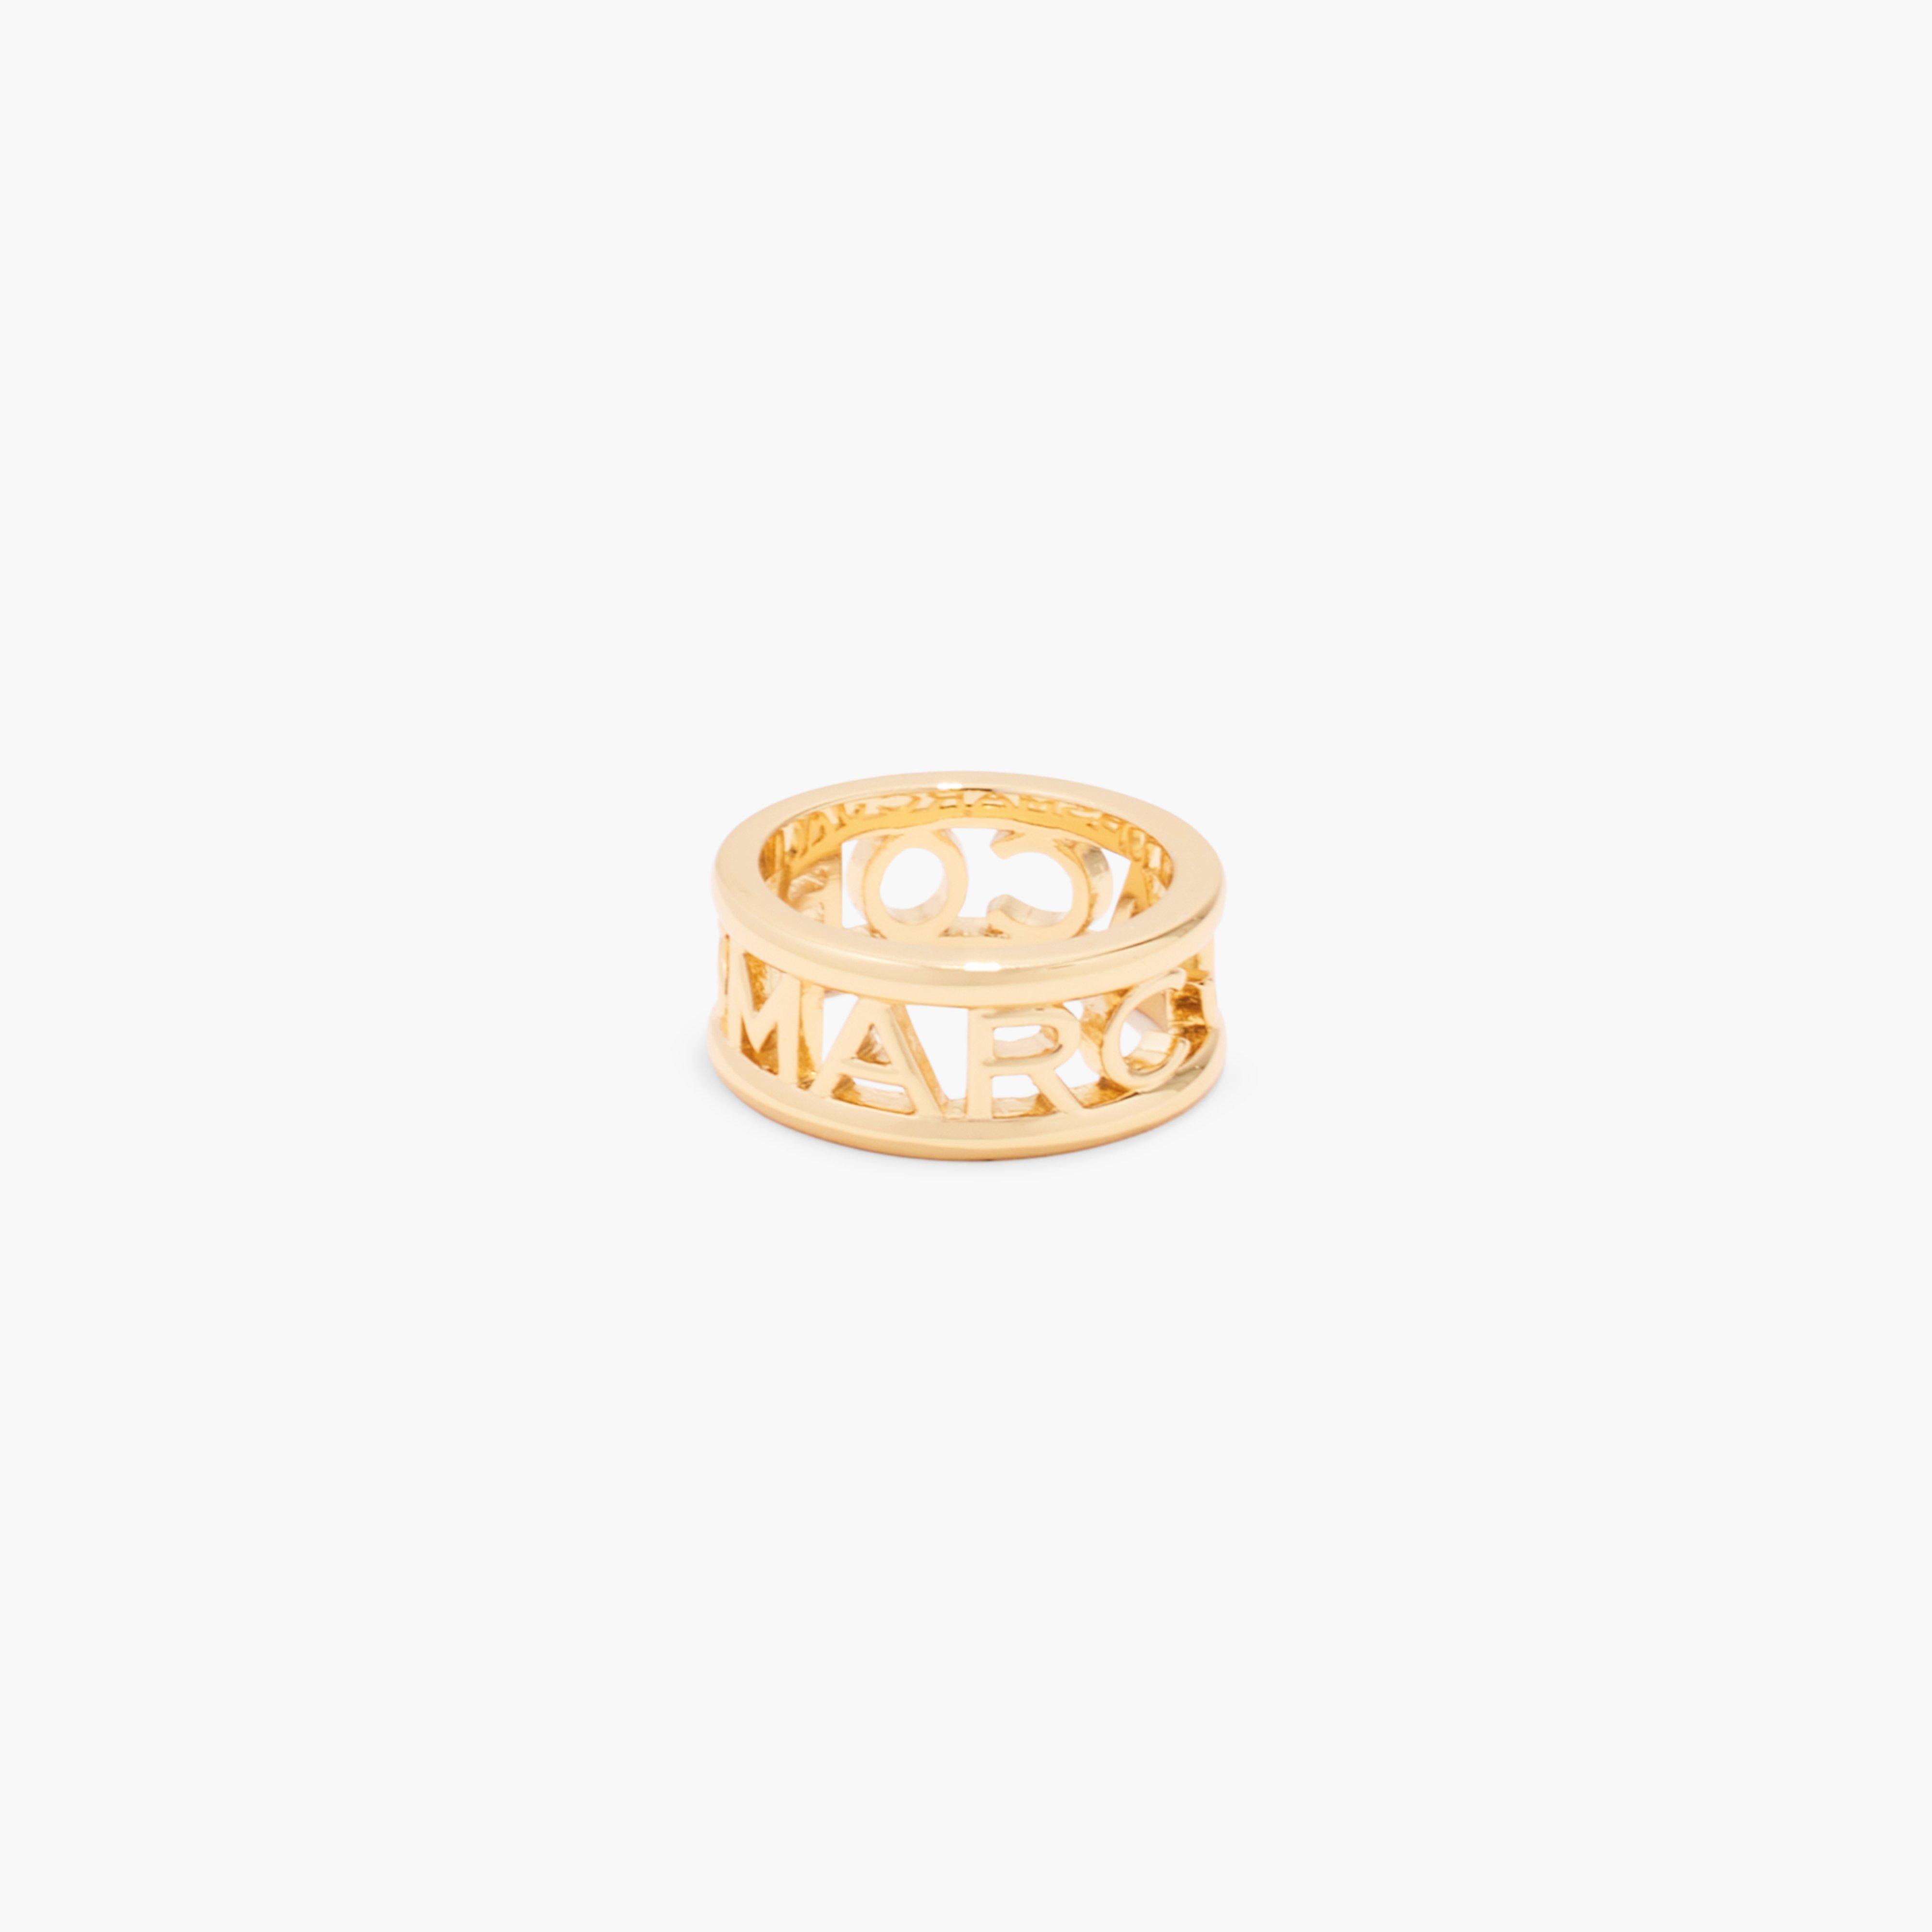 Marc by Marc jacobs The Monogram Ring,GOLD